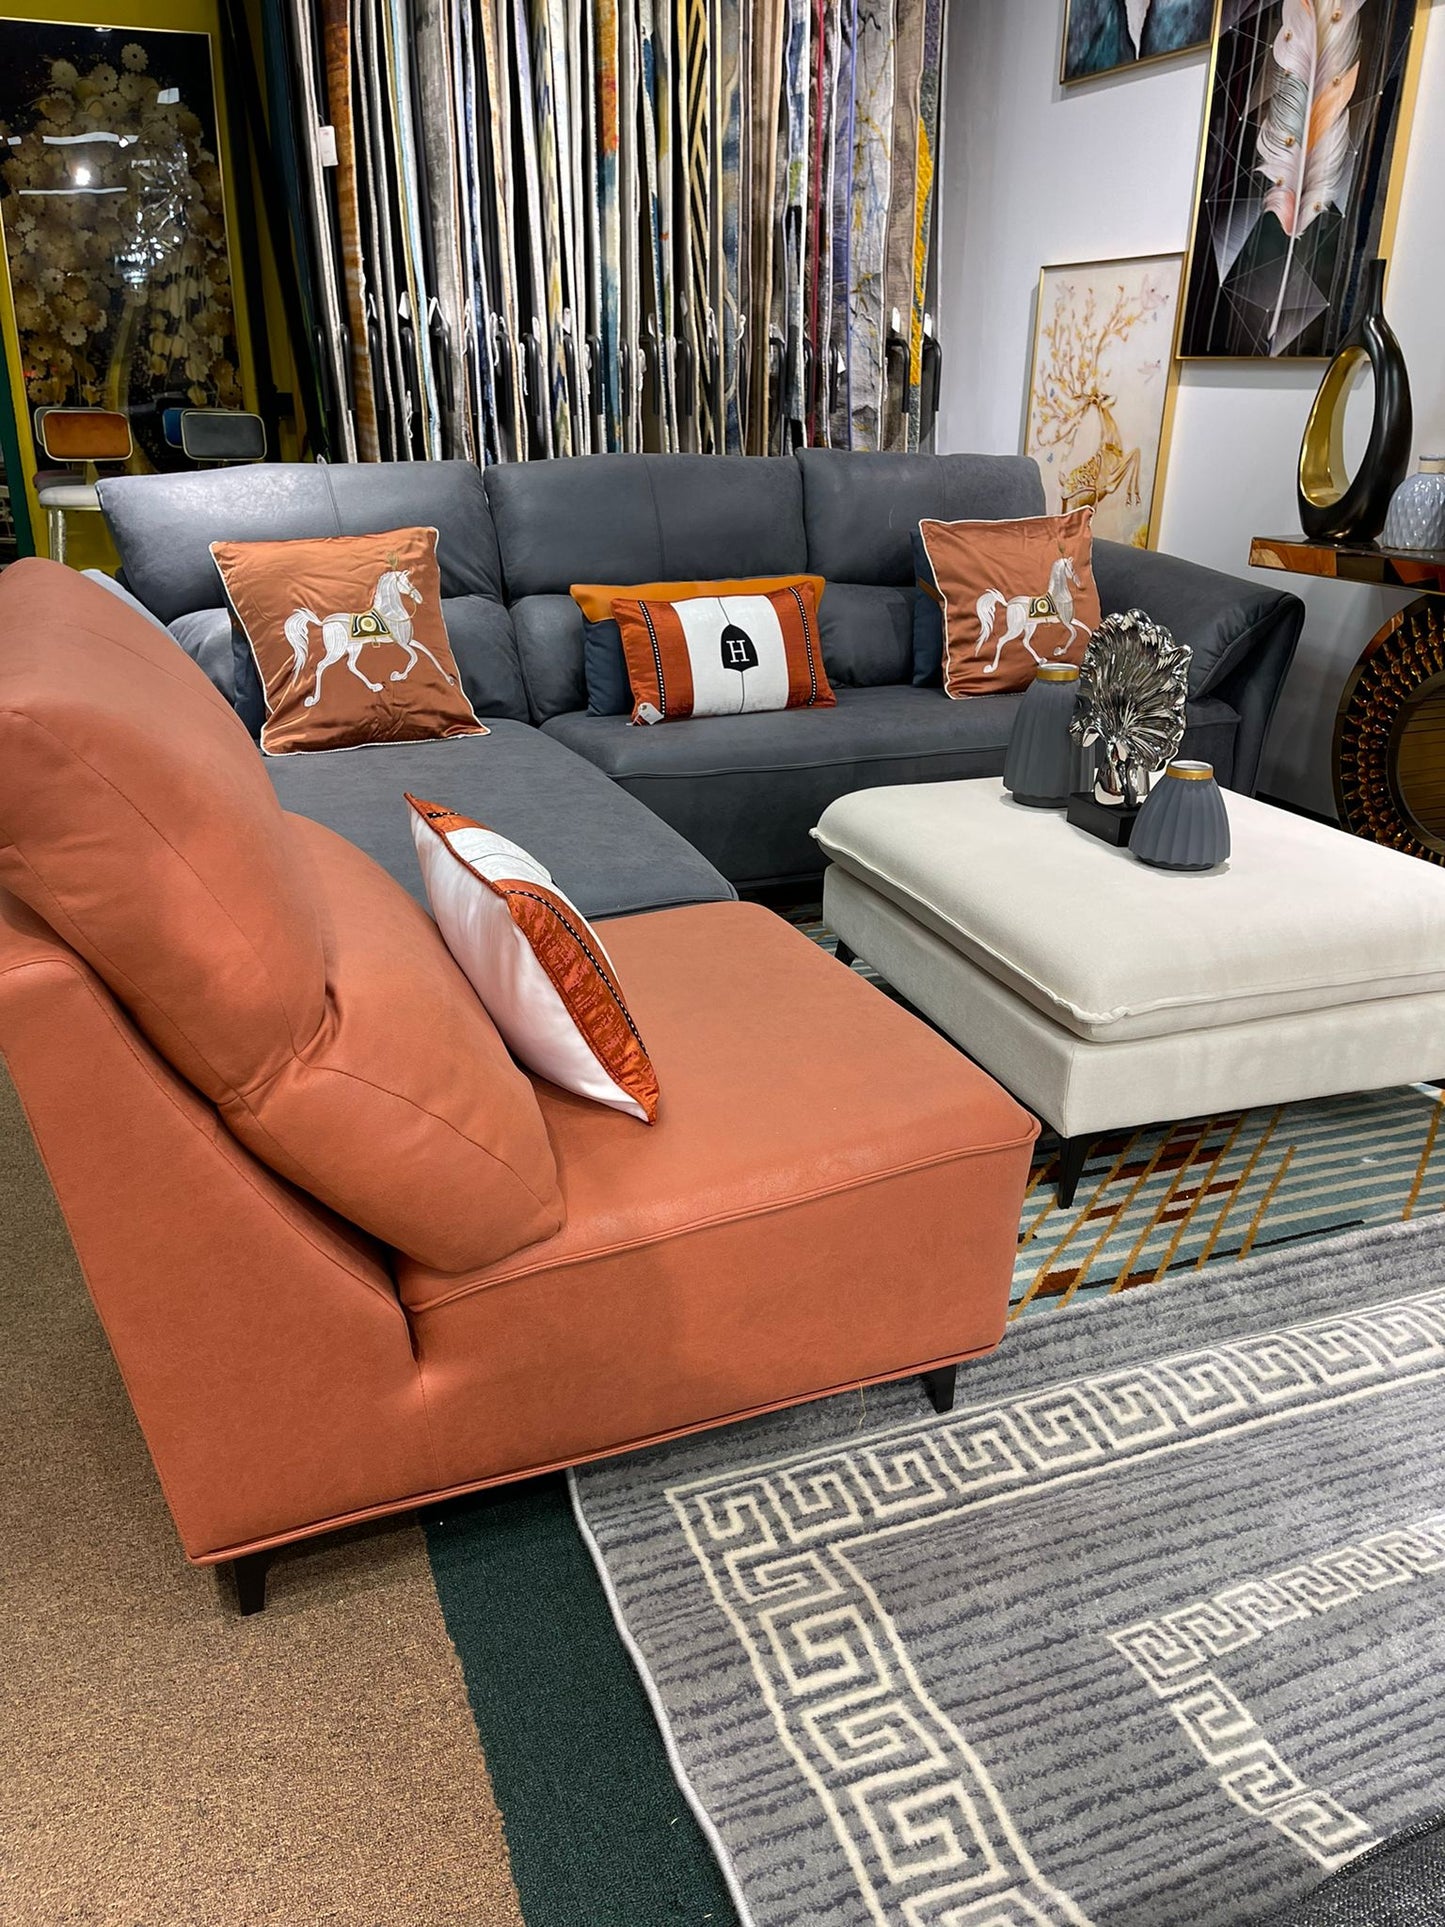 Peach and Grey Sectional